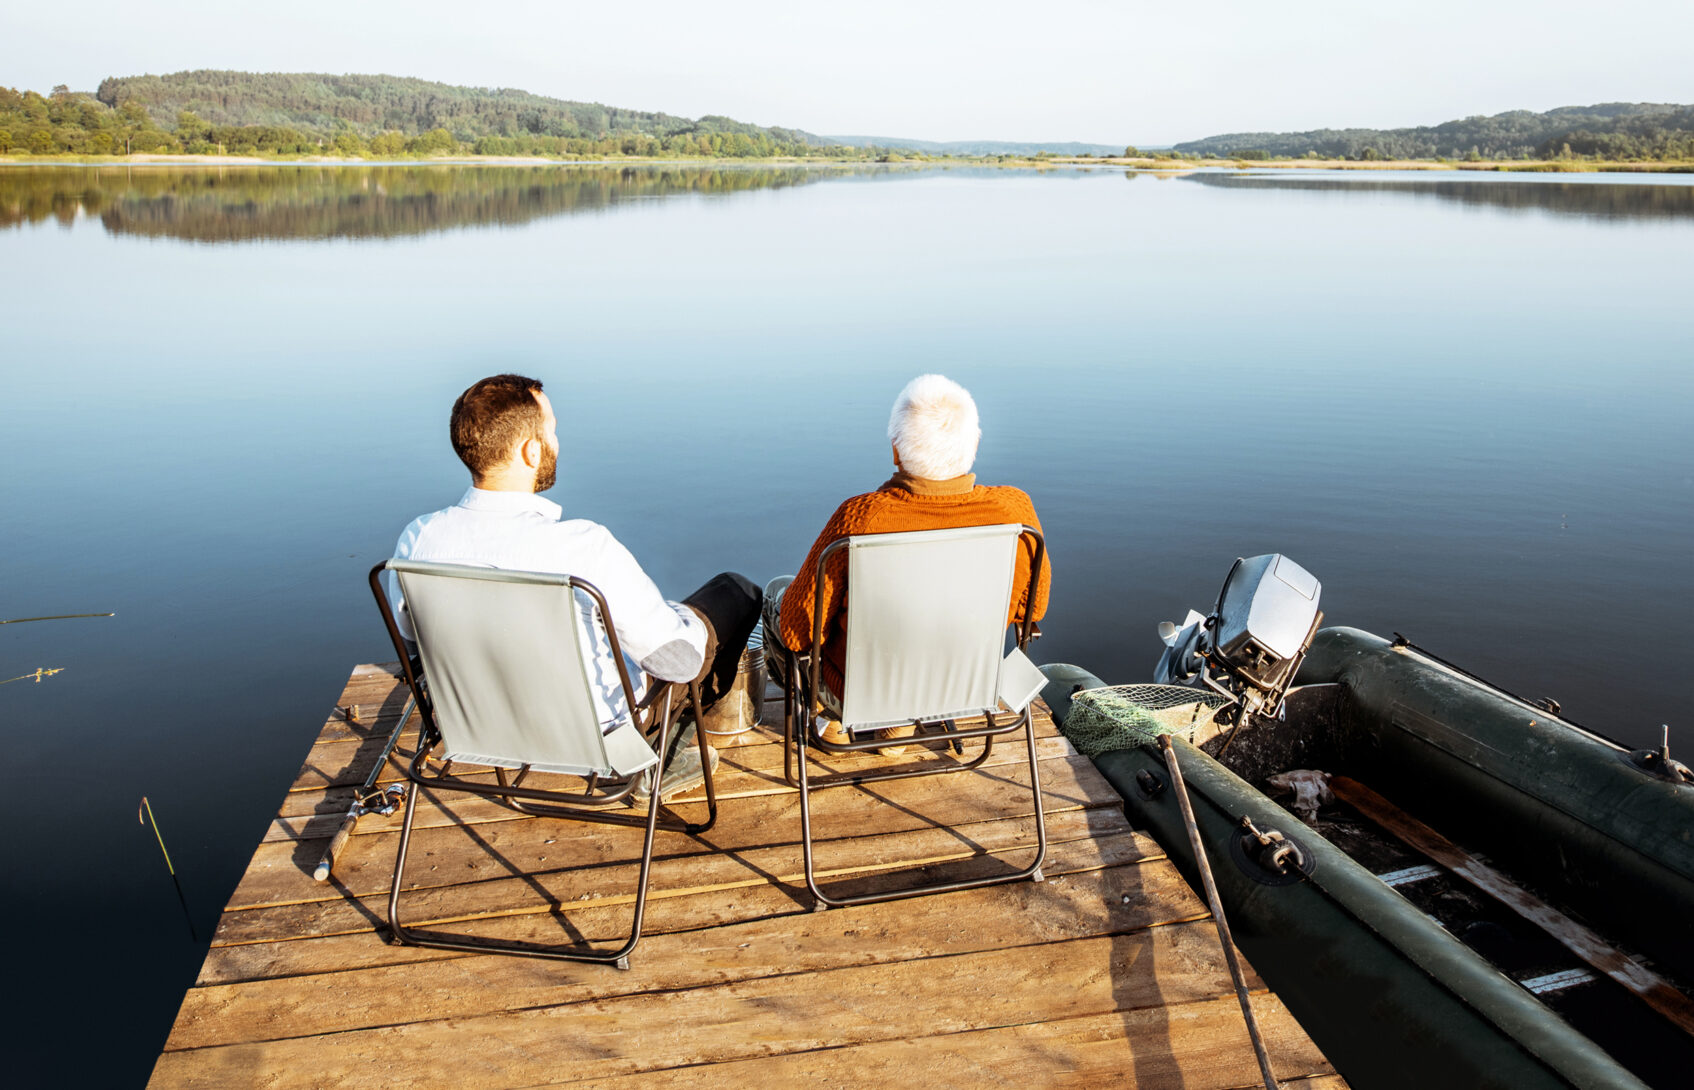 Father and son sitting on a dock at the edge of a lake talking